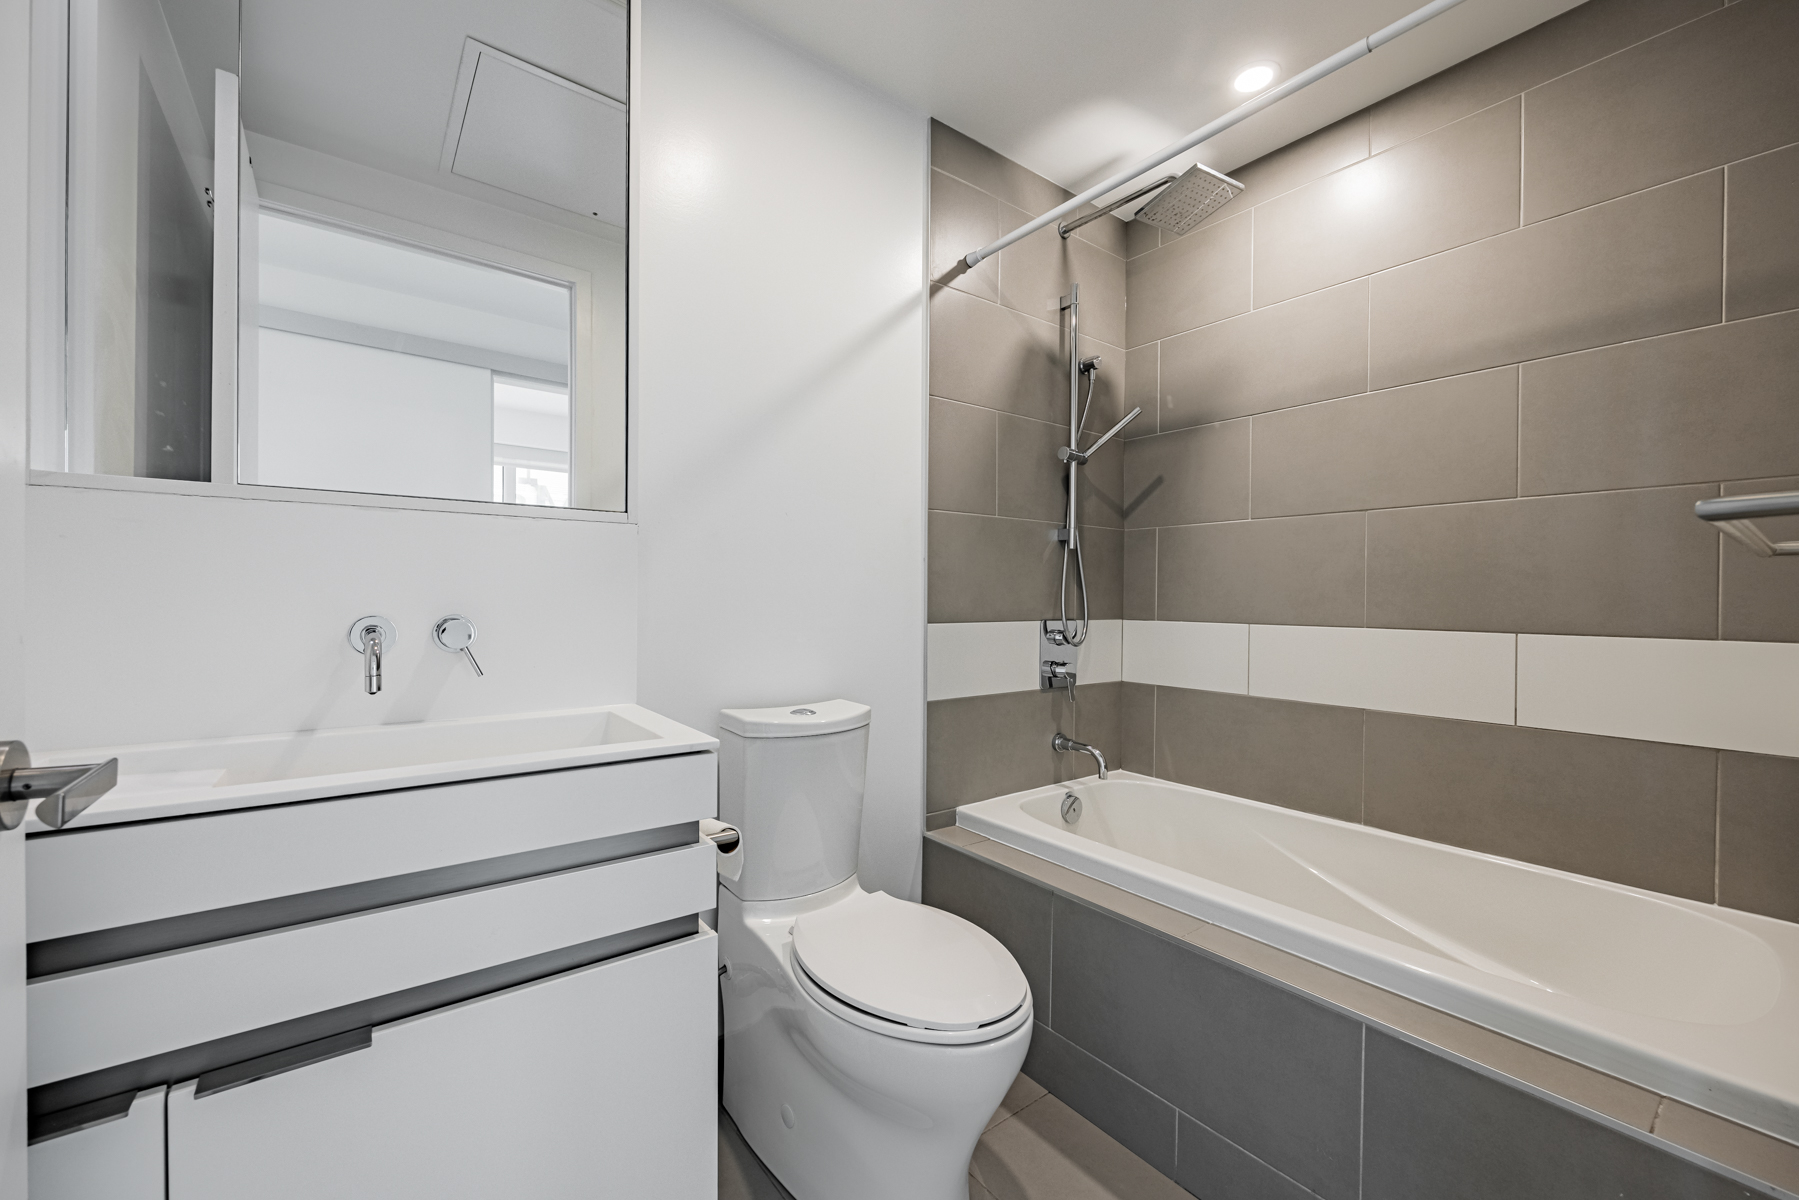 197 Yonge St Unit 2209 primary bath with porcelain tiles, Corian sink, dual showerheads and soaker tub.